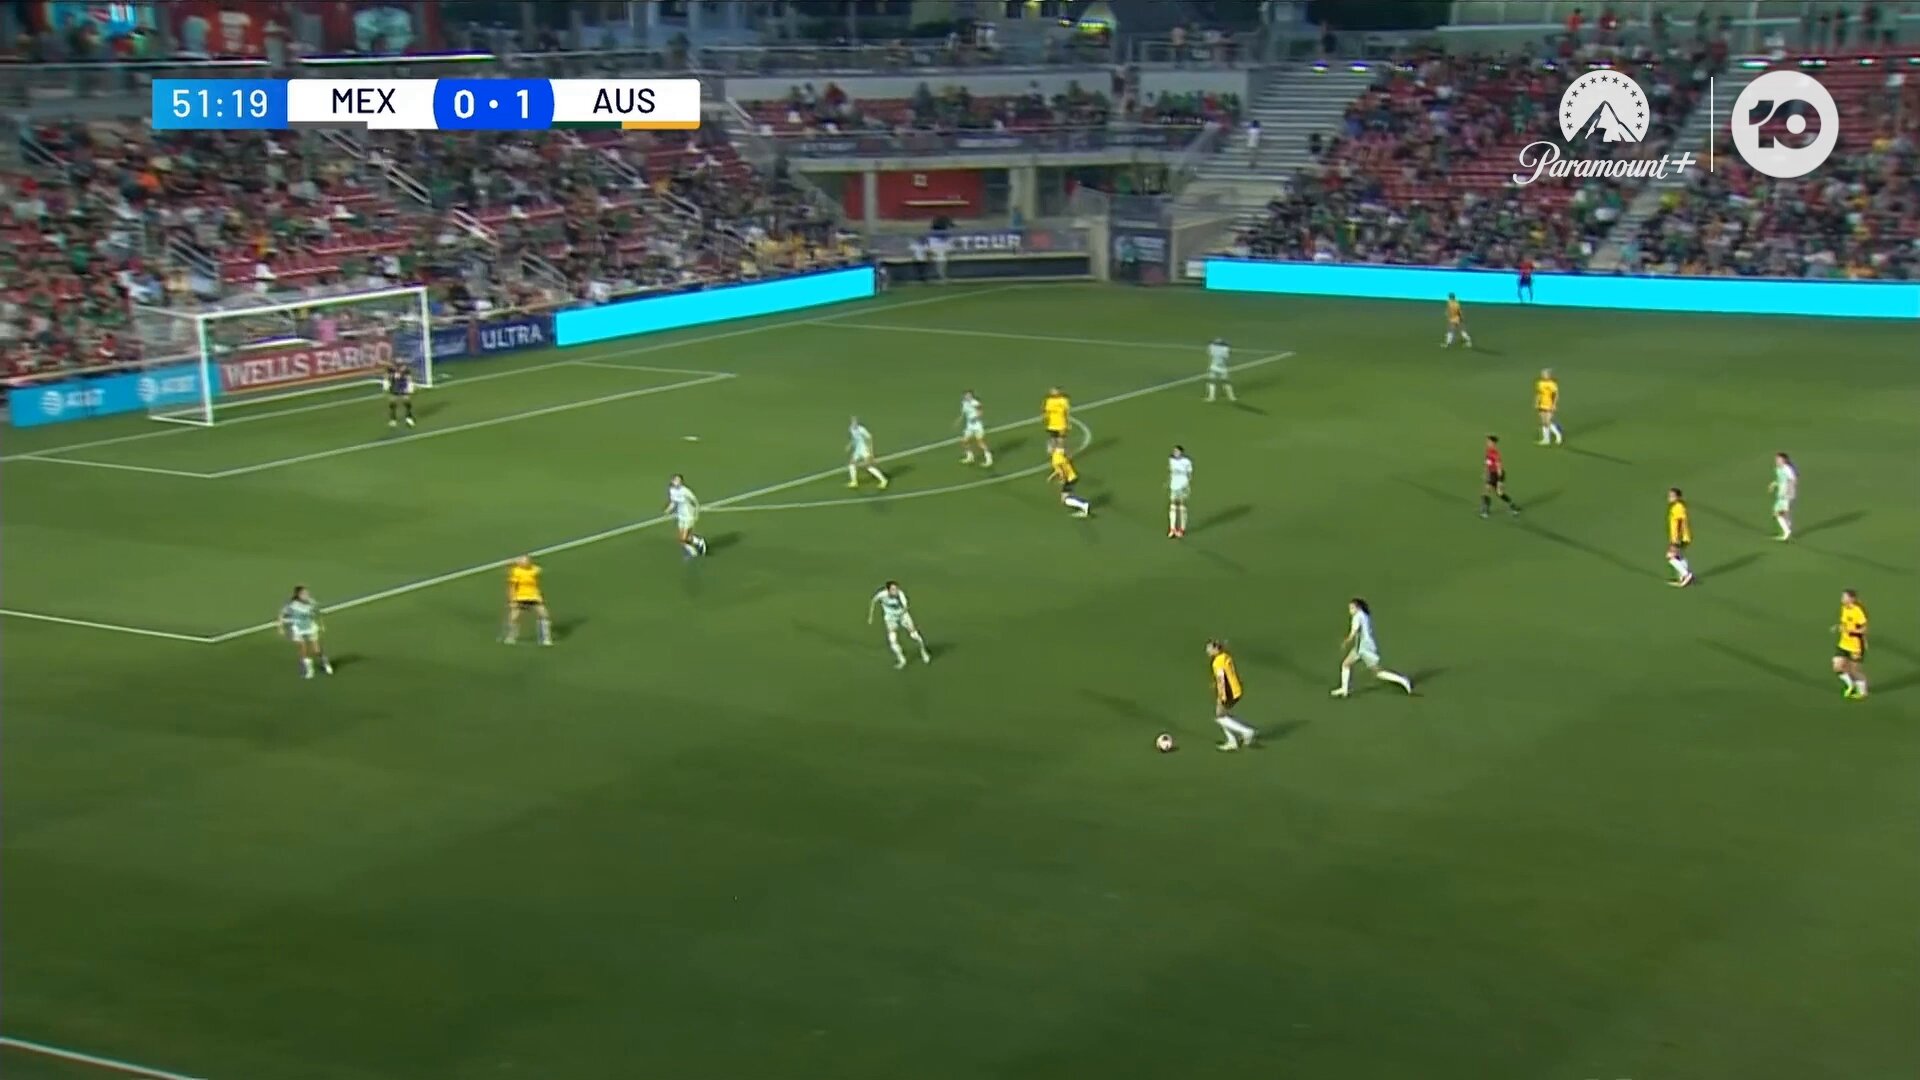 Give @CaitlinFoord a glance and you've lost your chance 💃🎥: @10FootballAU#Matildas #MEXvAUS